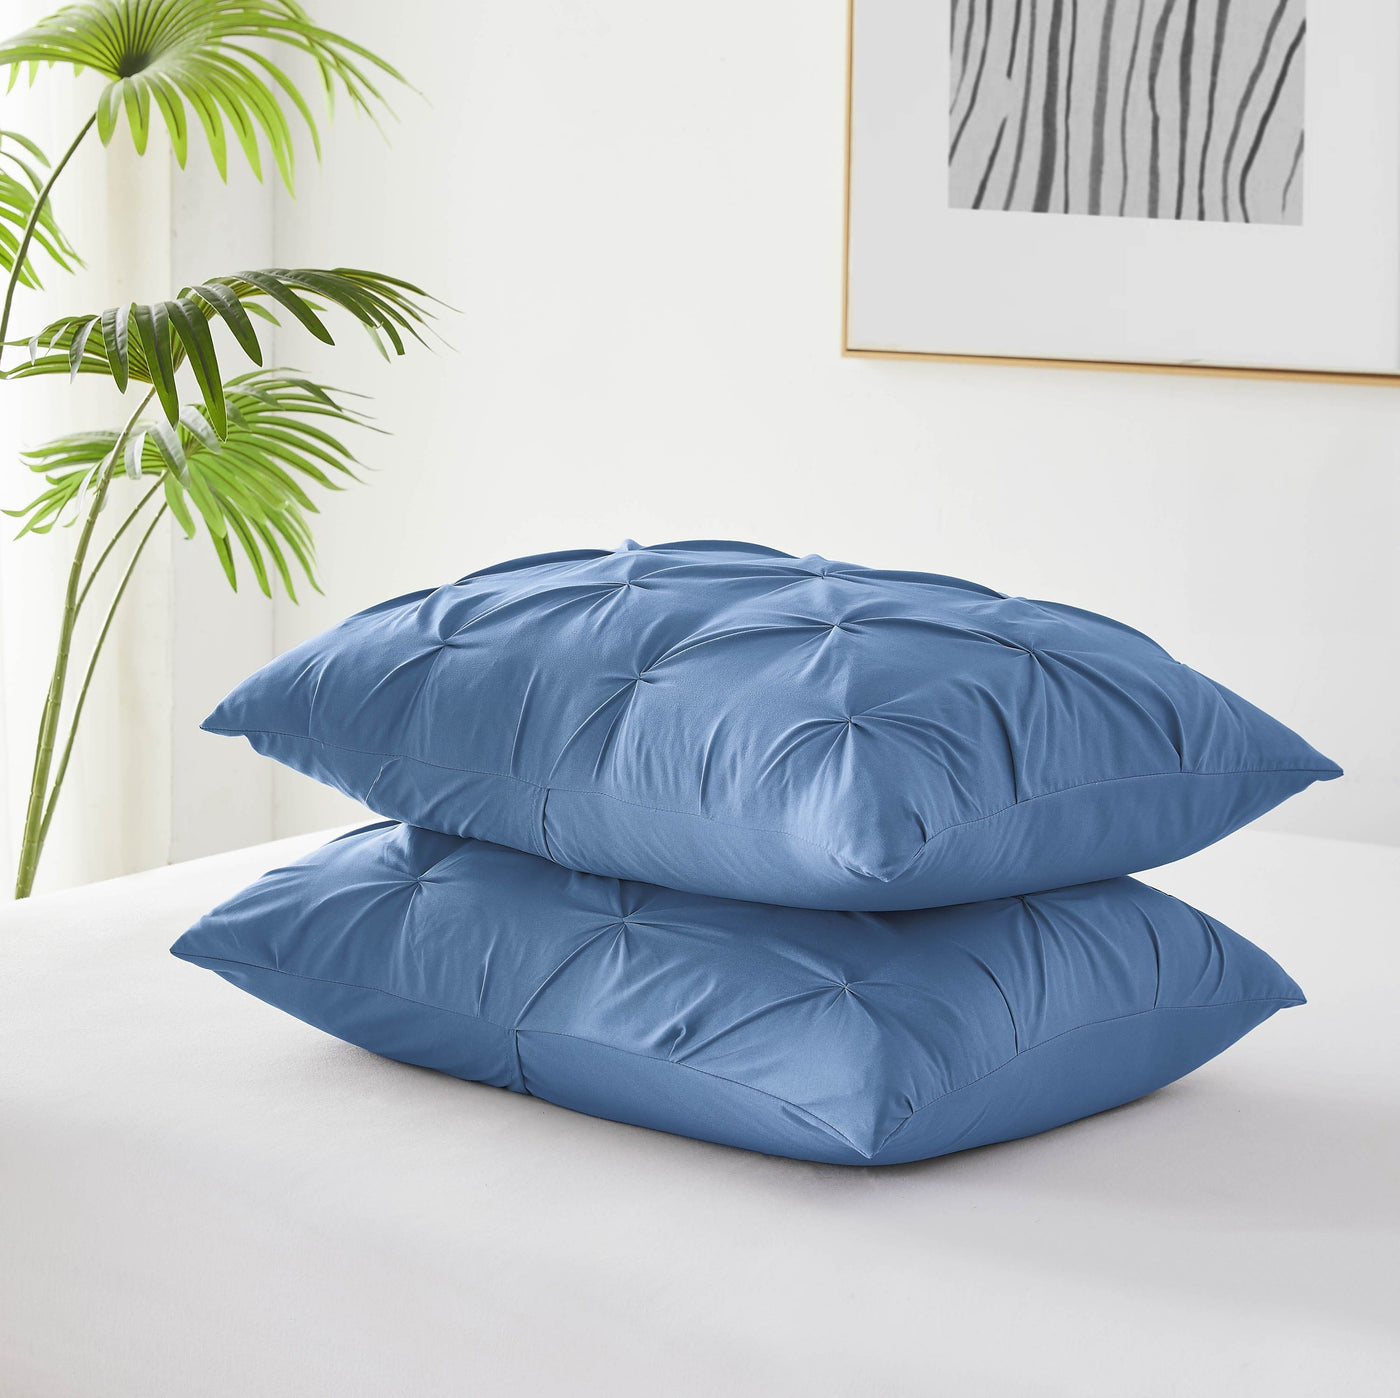 Detailed Shams Image of Pintuck Pinch Pleated Duvet Cover Set in Coronet Blue#color_vilano-coronet-blue